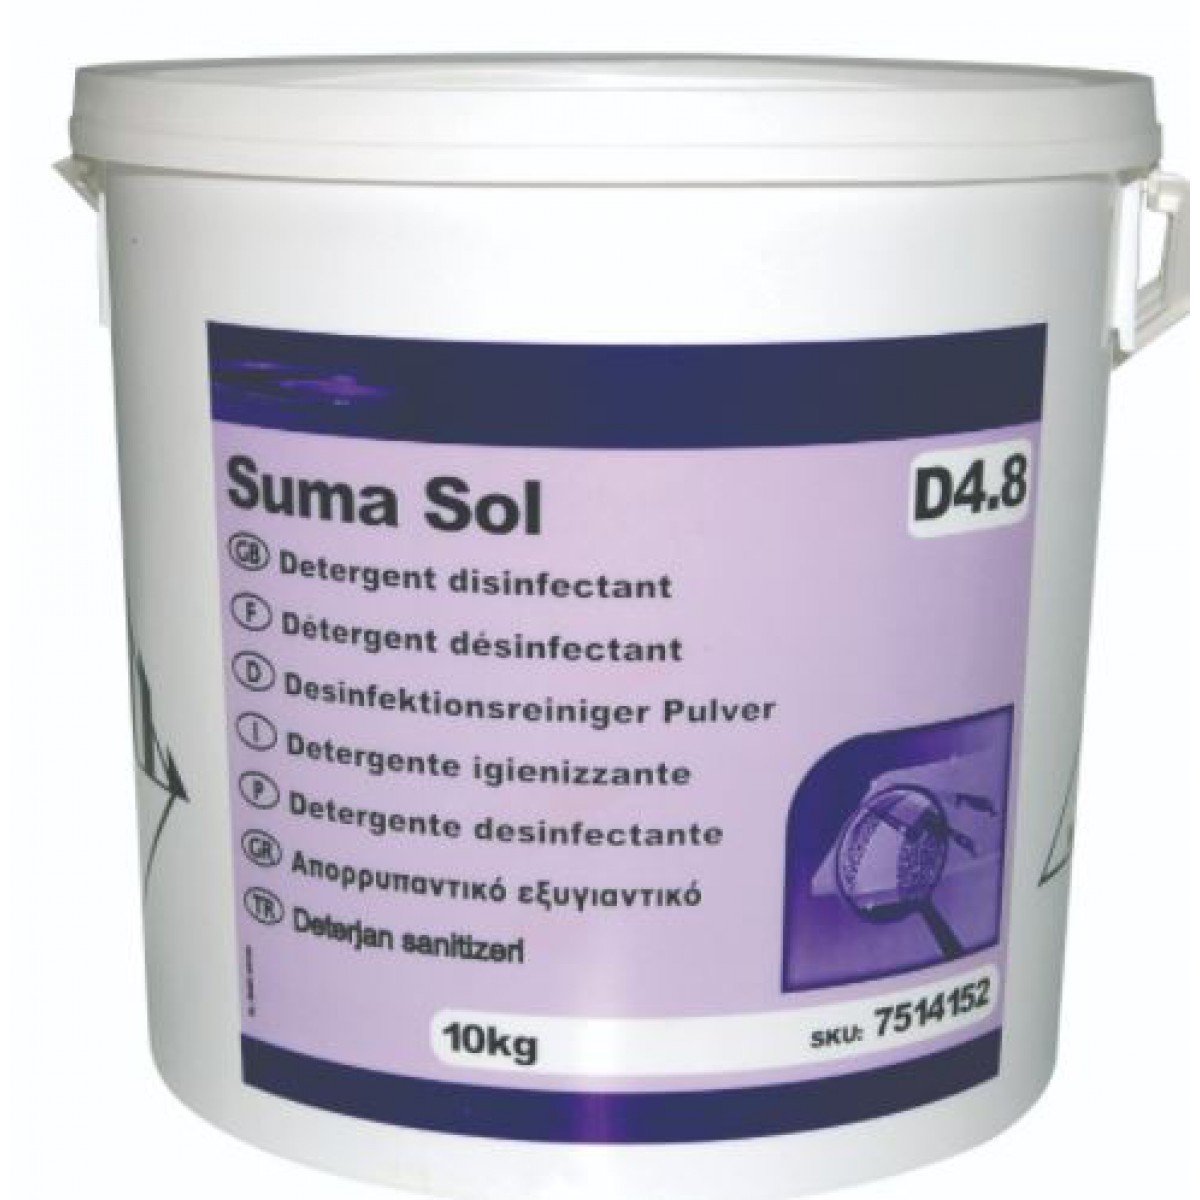 Suma Sol D4.8 - Powder Detergent Disinfectant for use on all har